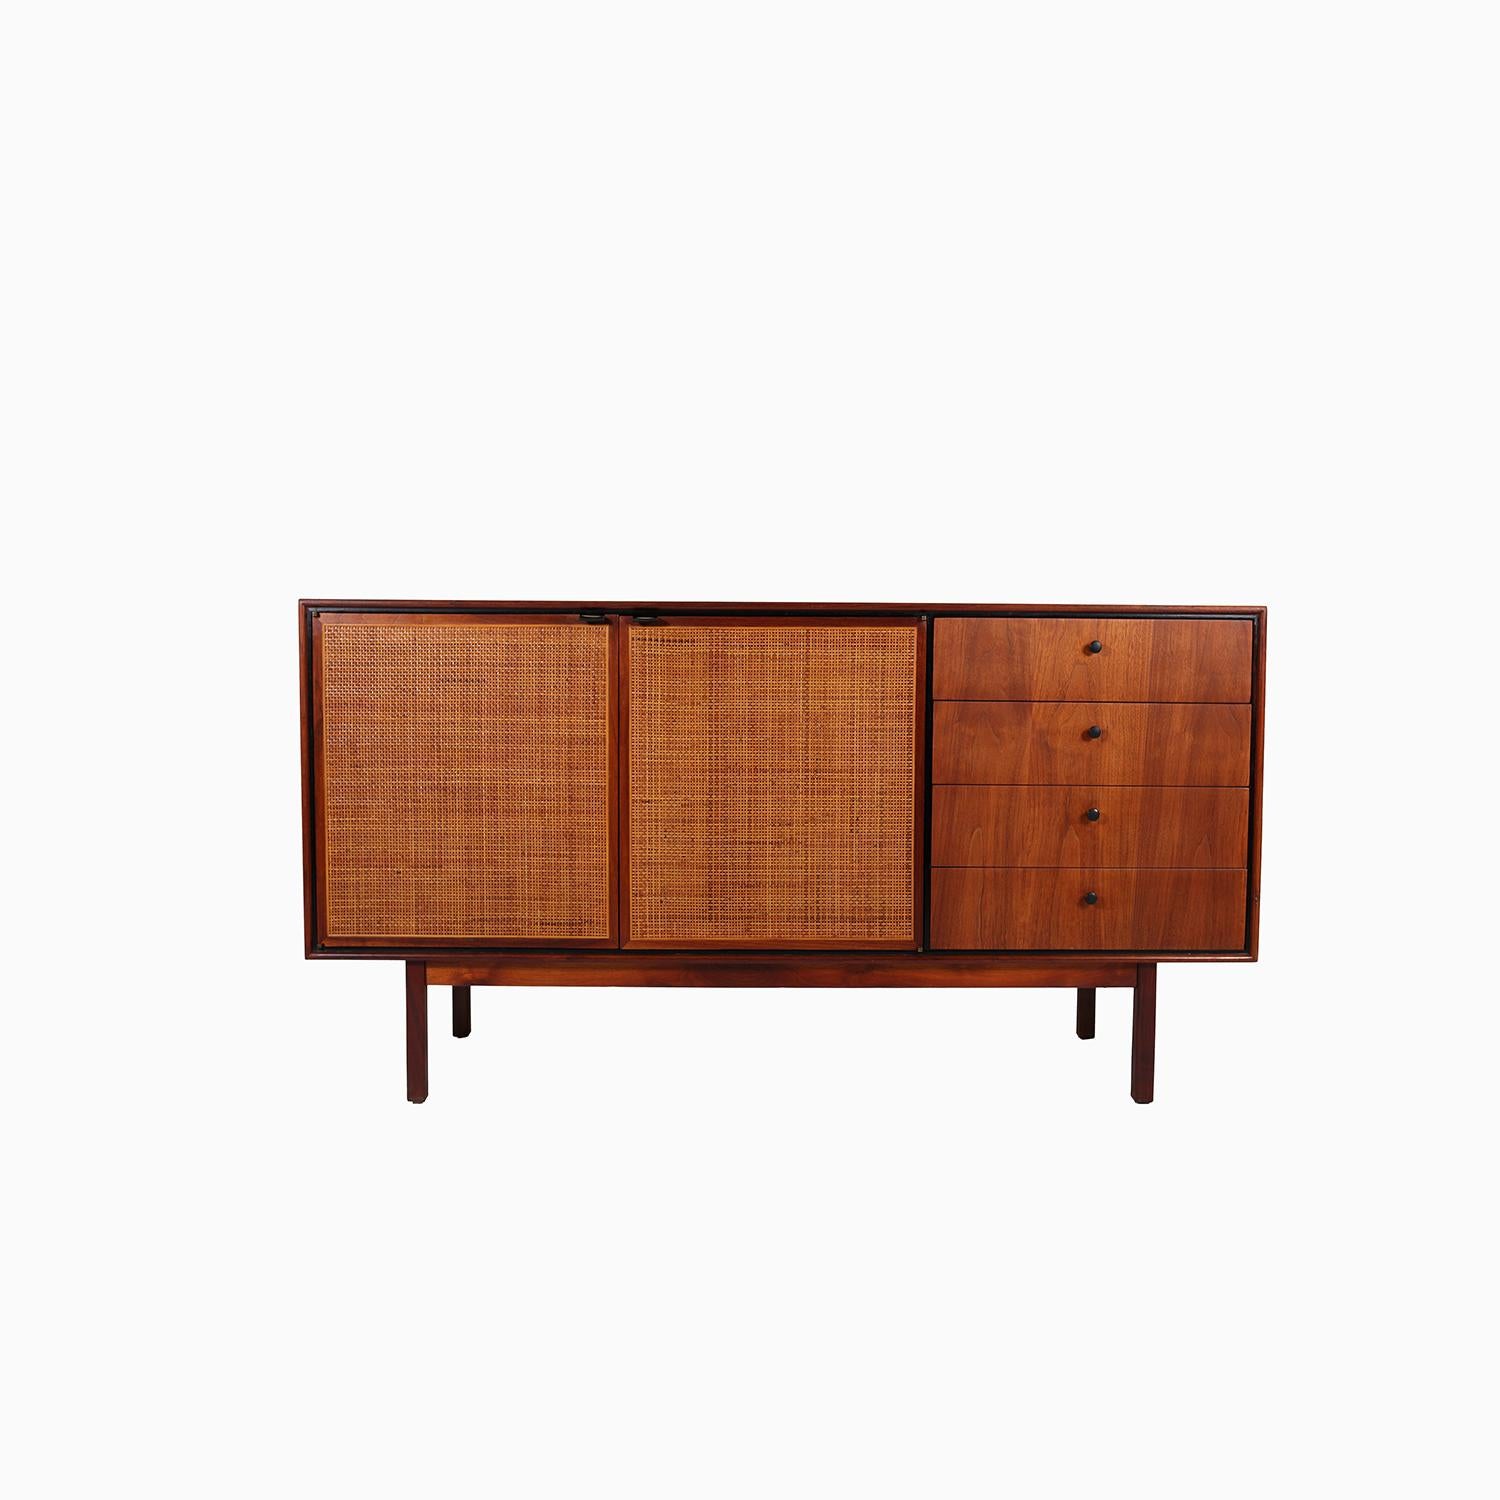 An American Mid-Century Modern sideboard in a rich walnut. Caned front doors, accented by a black trim and black drawer pulls. An attractive sideboard with nice details and features. Ideal as a credenza or for its former intended use as a sideboard